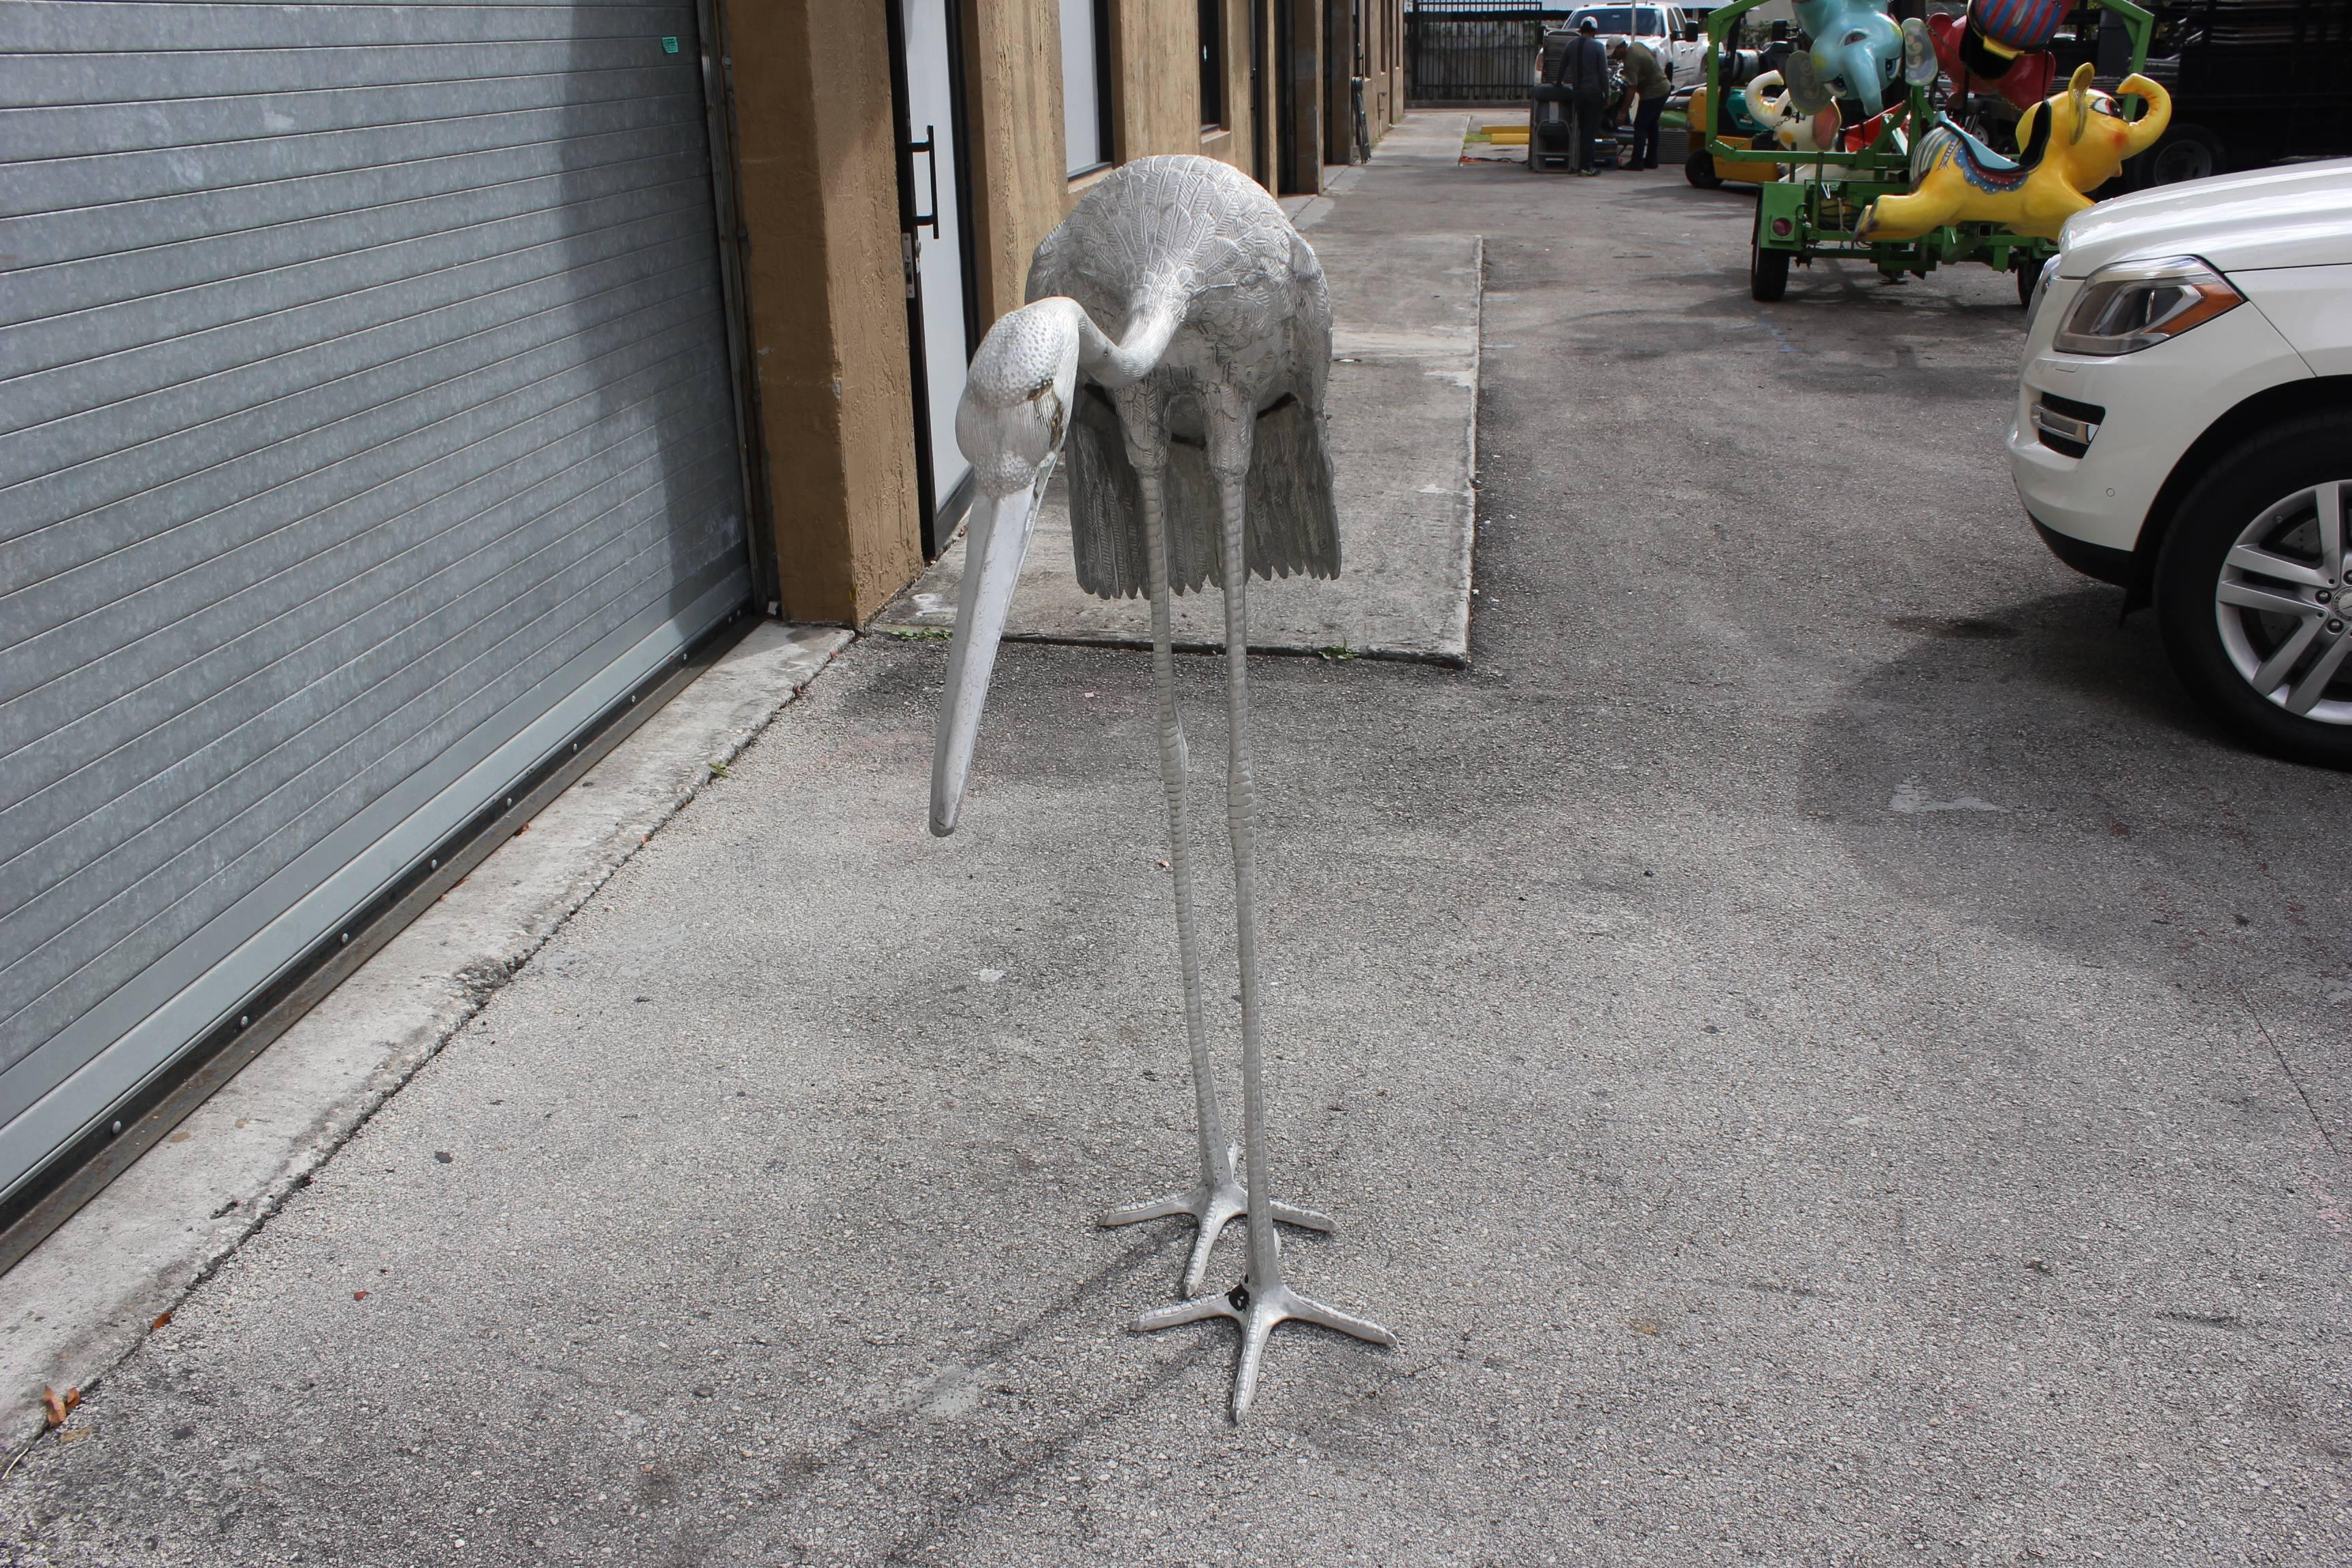 Mid-20th Century Beautiful Art Deco Flamingo Sculptures Very Large in Size, circa 1950